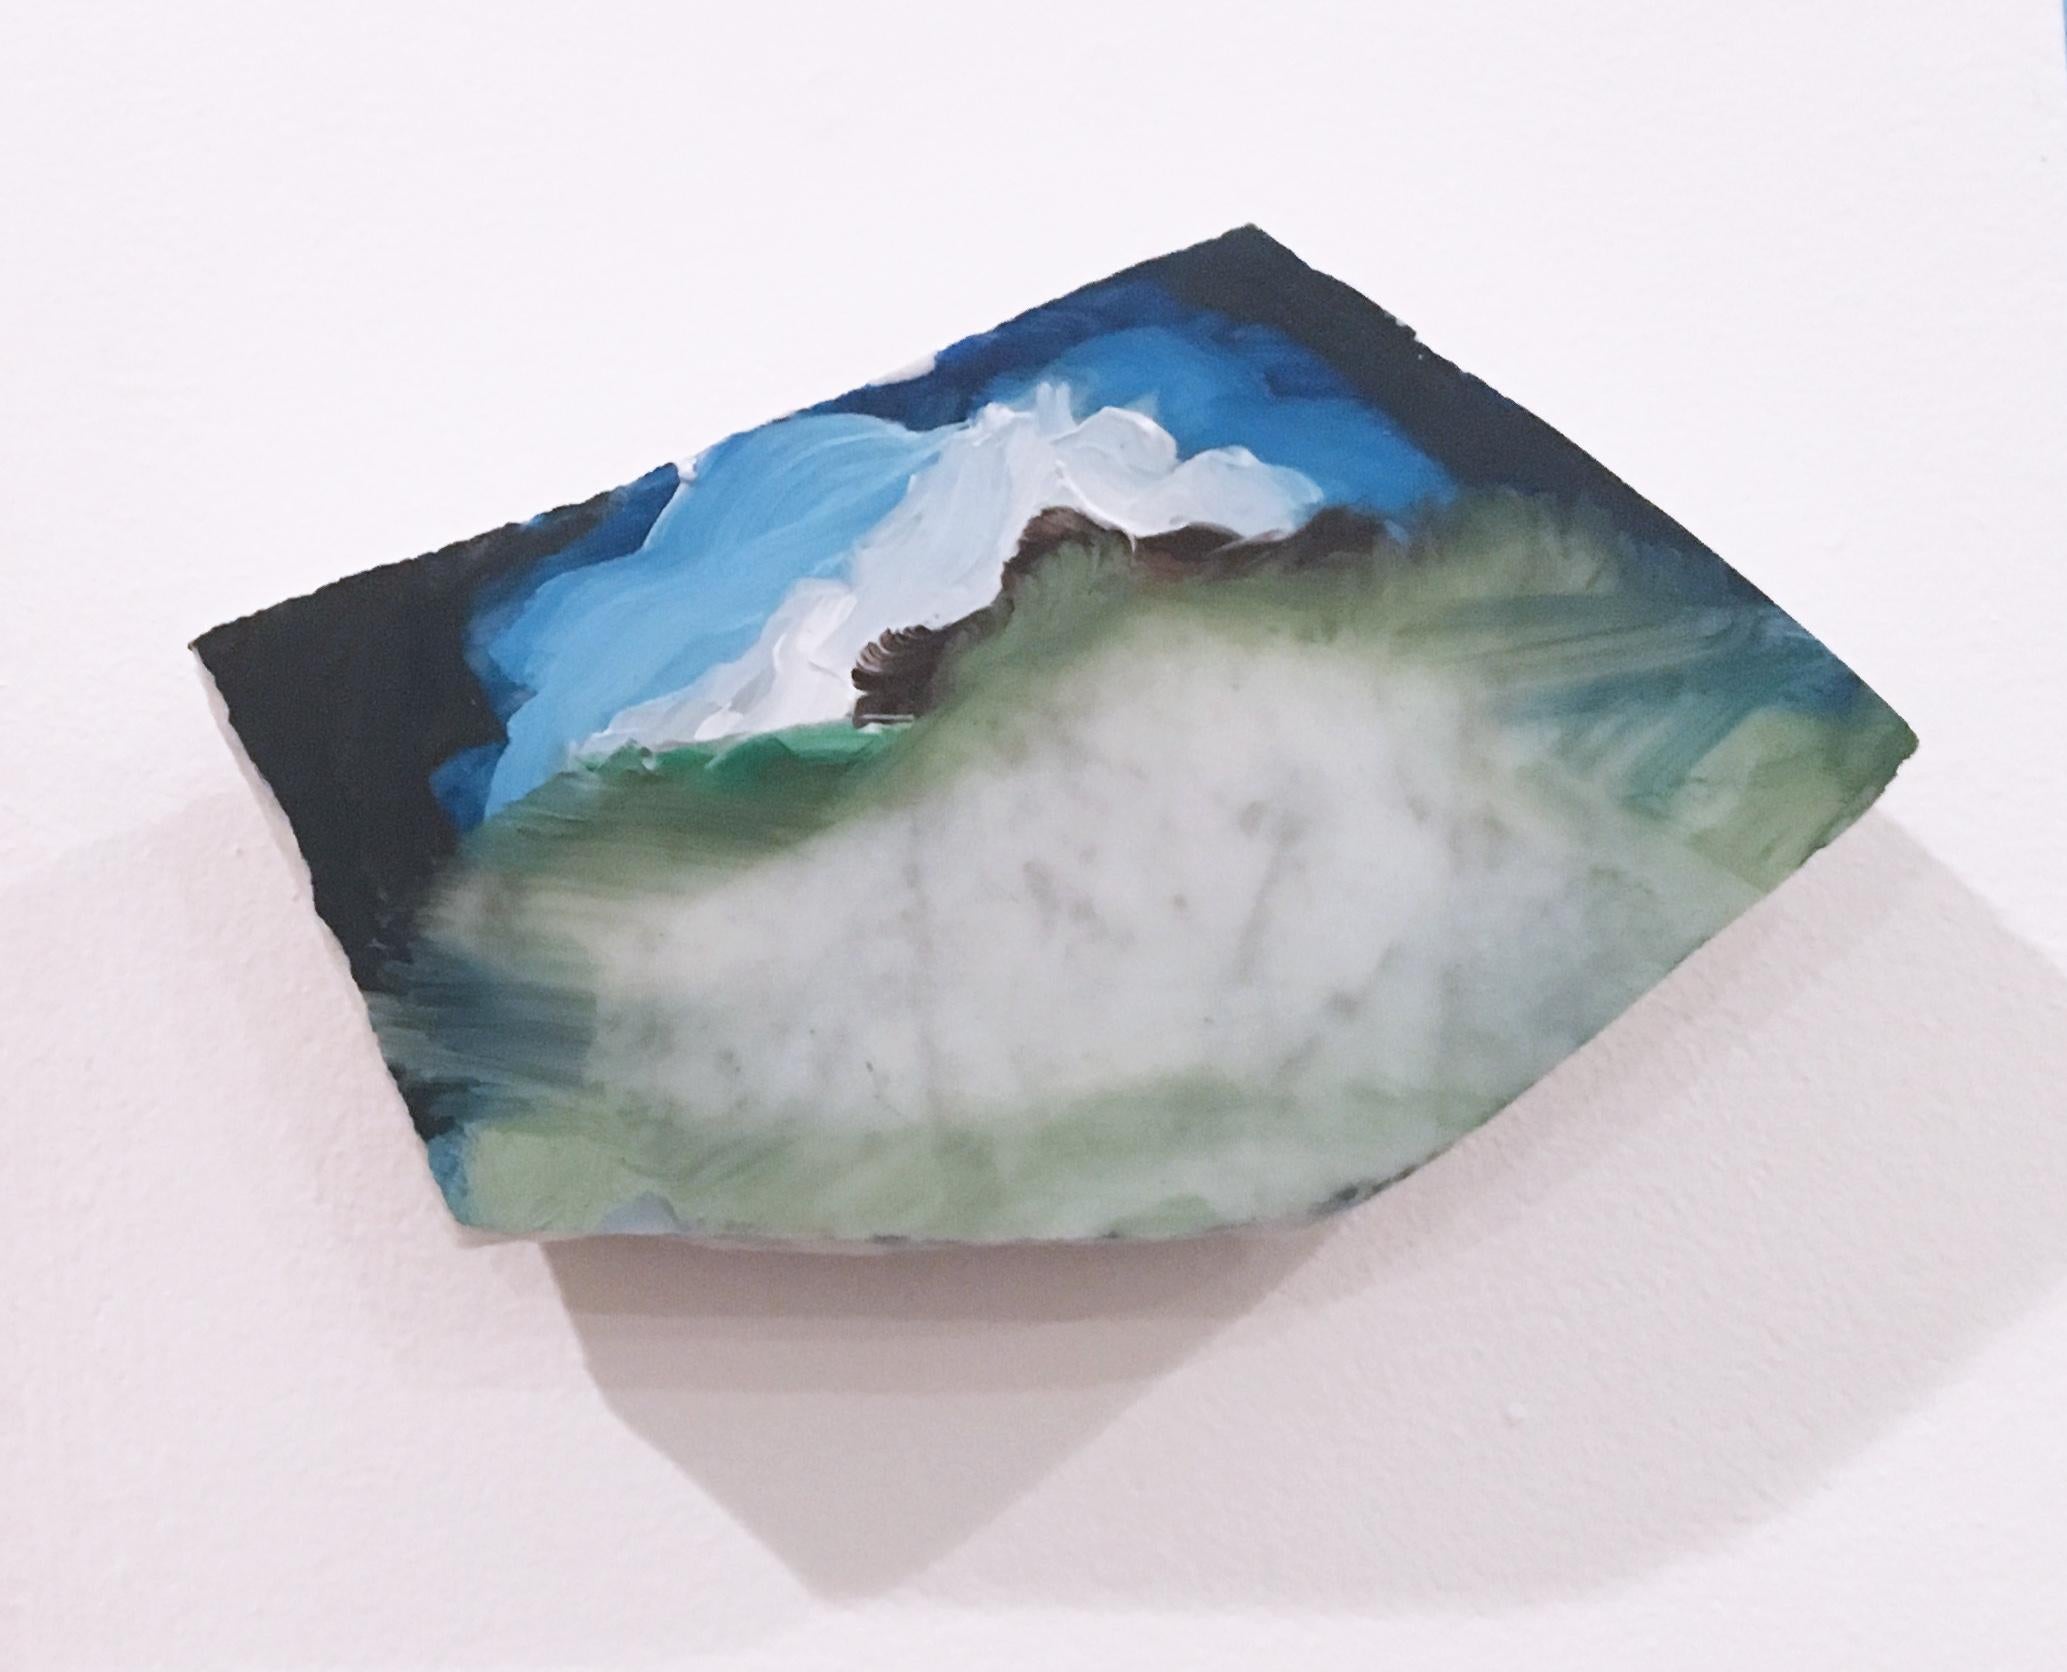 Untitled "Marble Fragment 10" 2019, oil, landscape, wall sculpture, clouds, blue